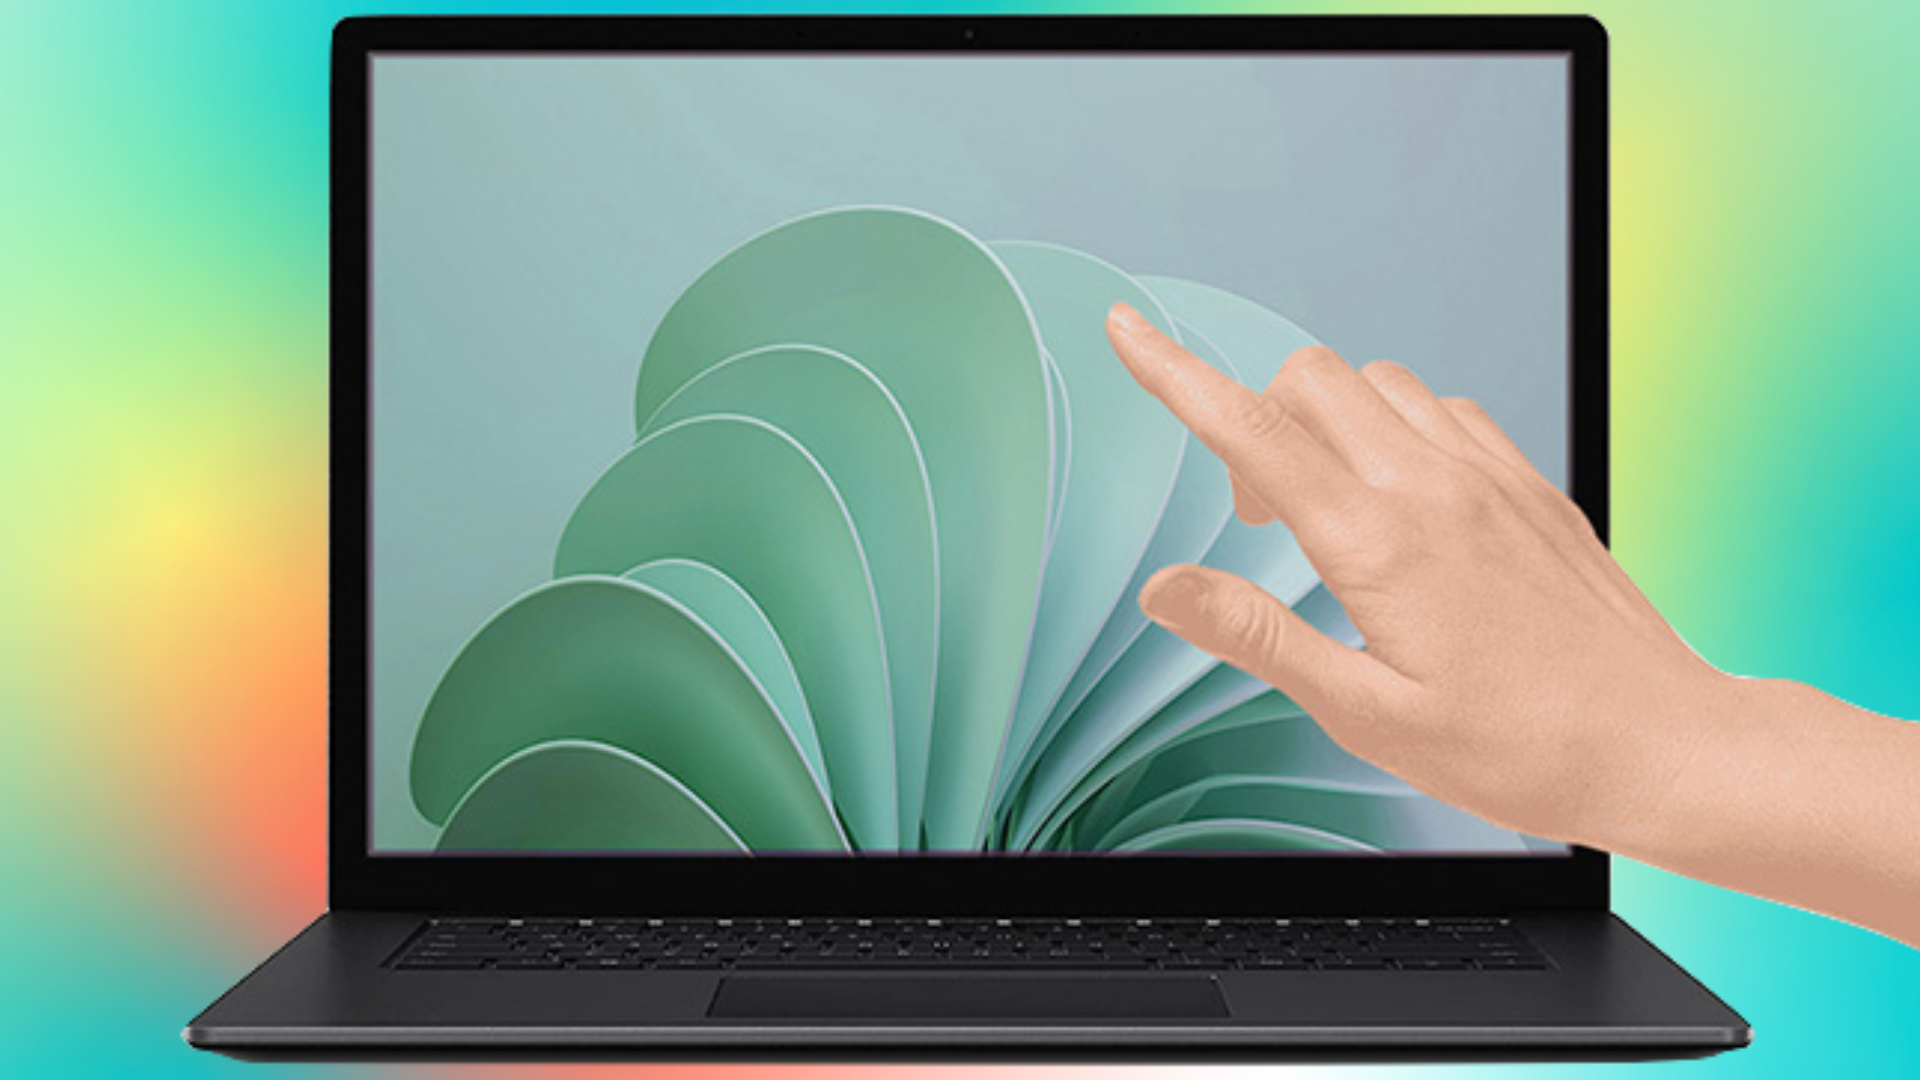 person touching Surface laptop screen.